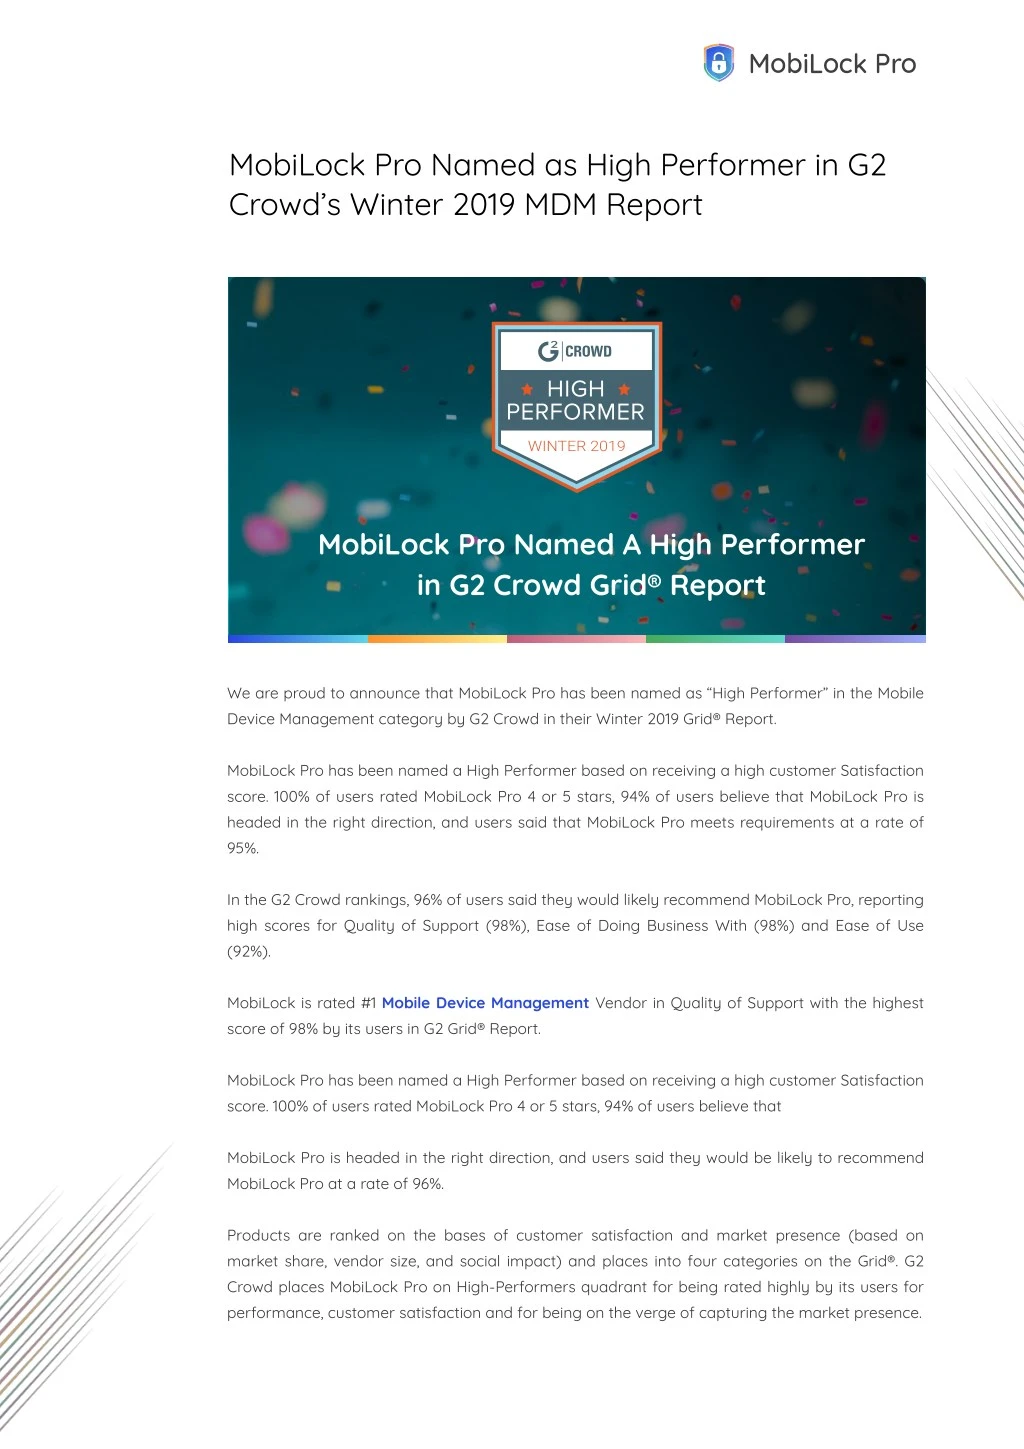 mobilock pro named as high performer in g2 crowd